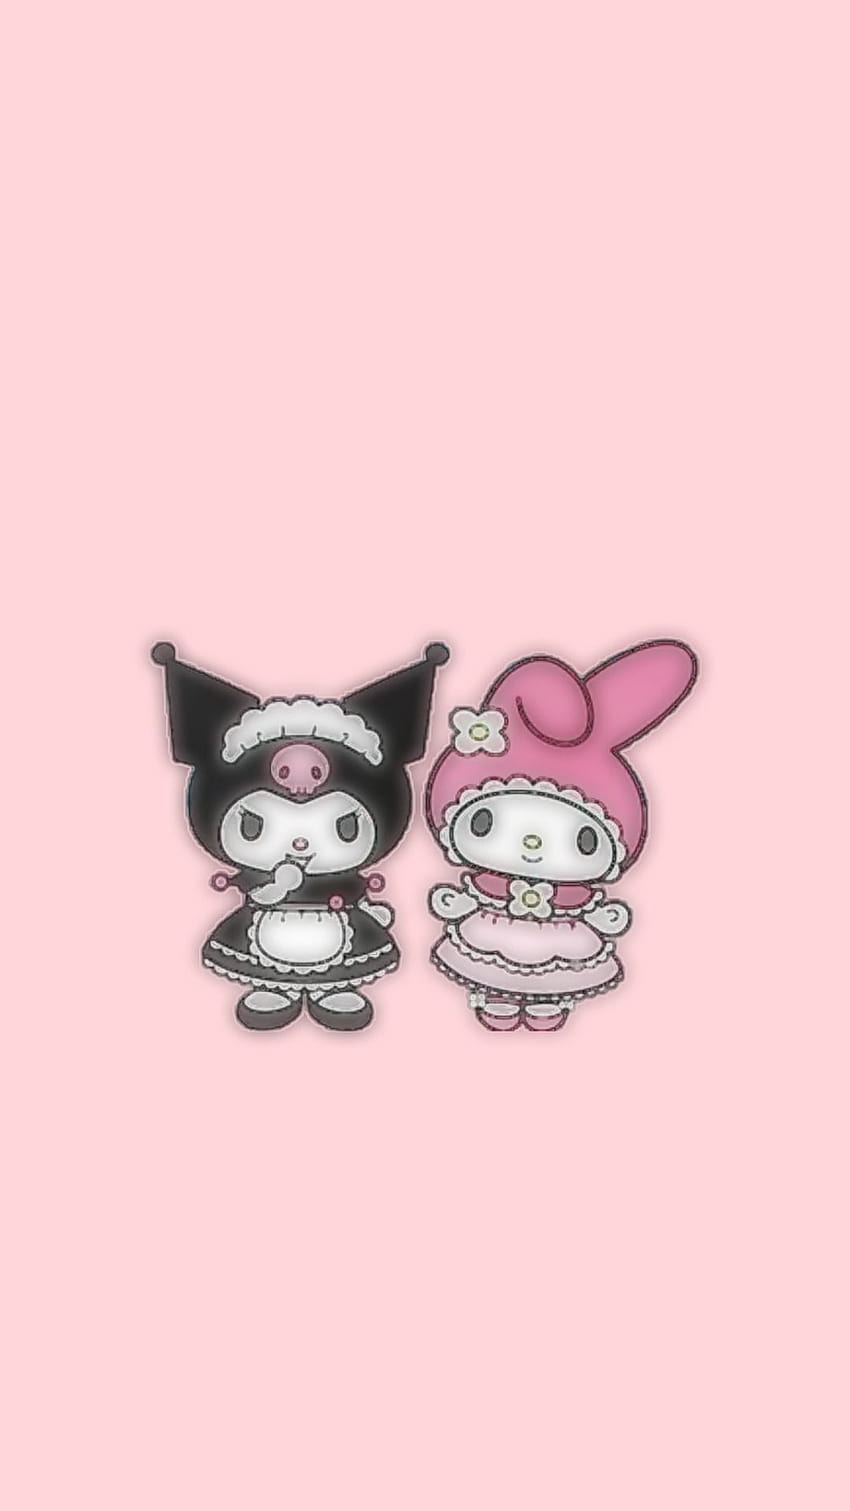 Two cute little girls with pink and black dresses - Hello Kitty